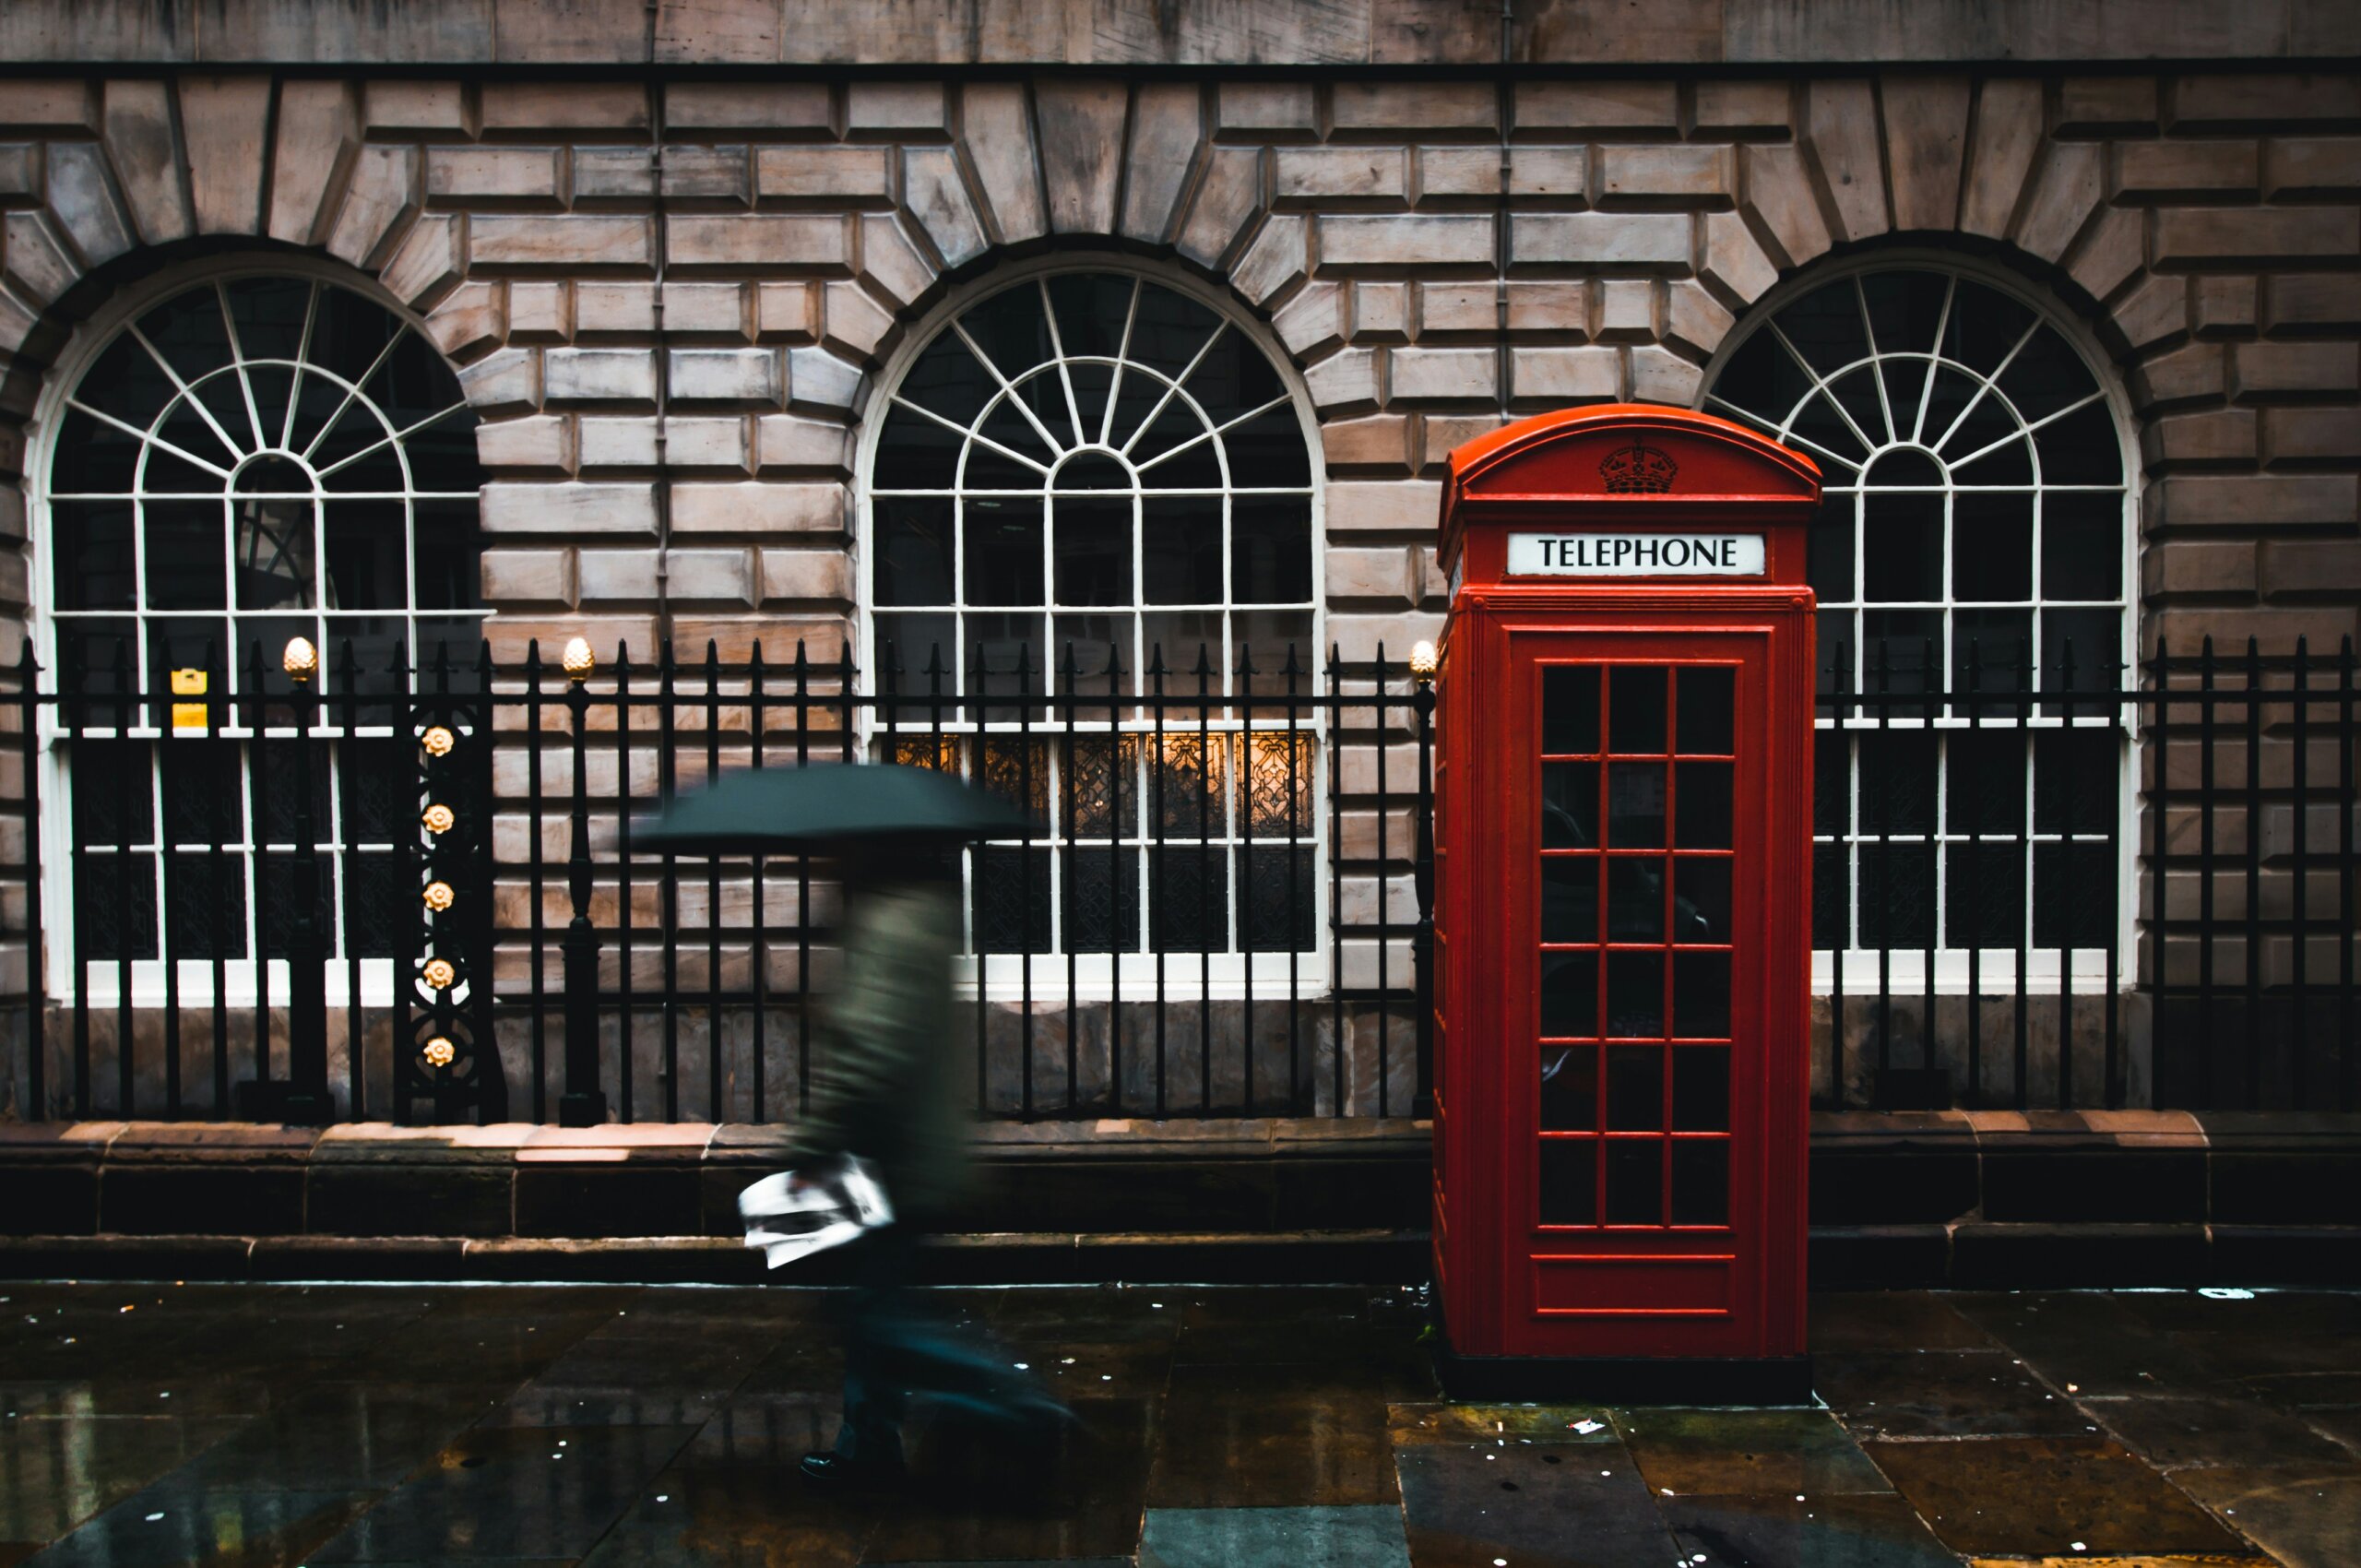 Red phone booth in front of building of bricks